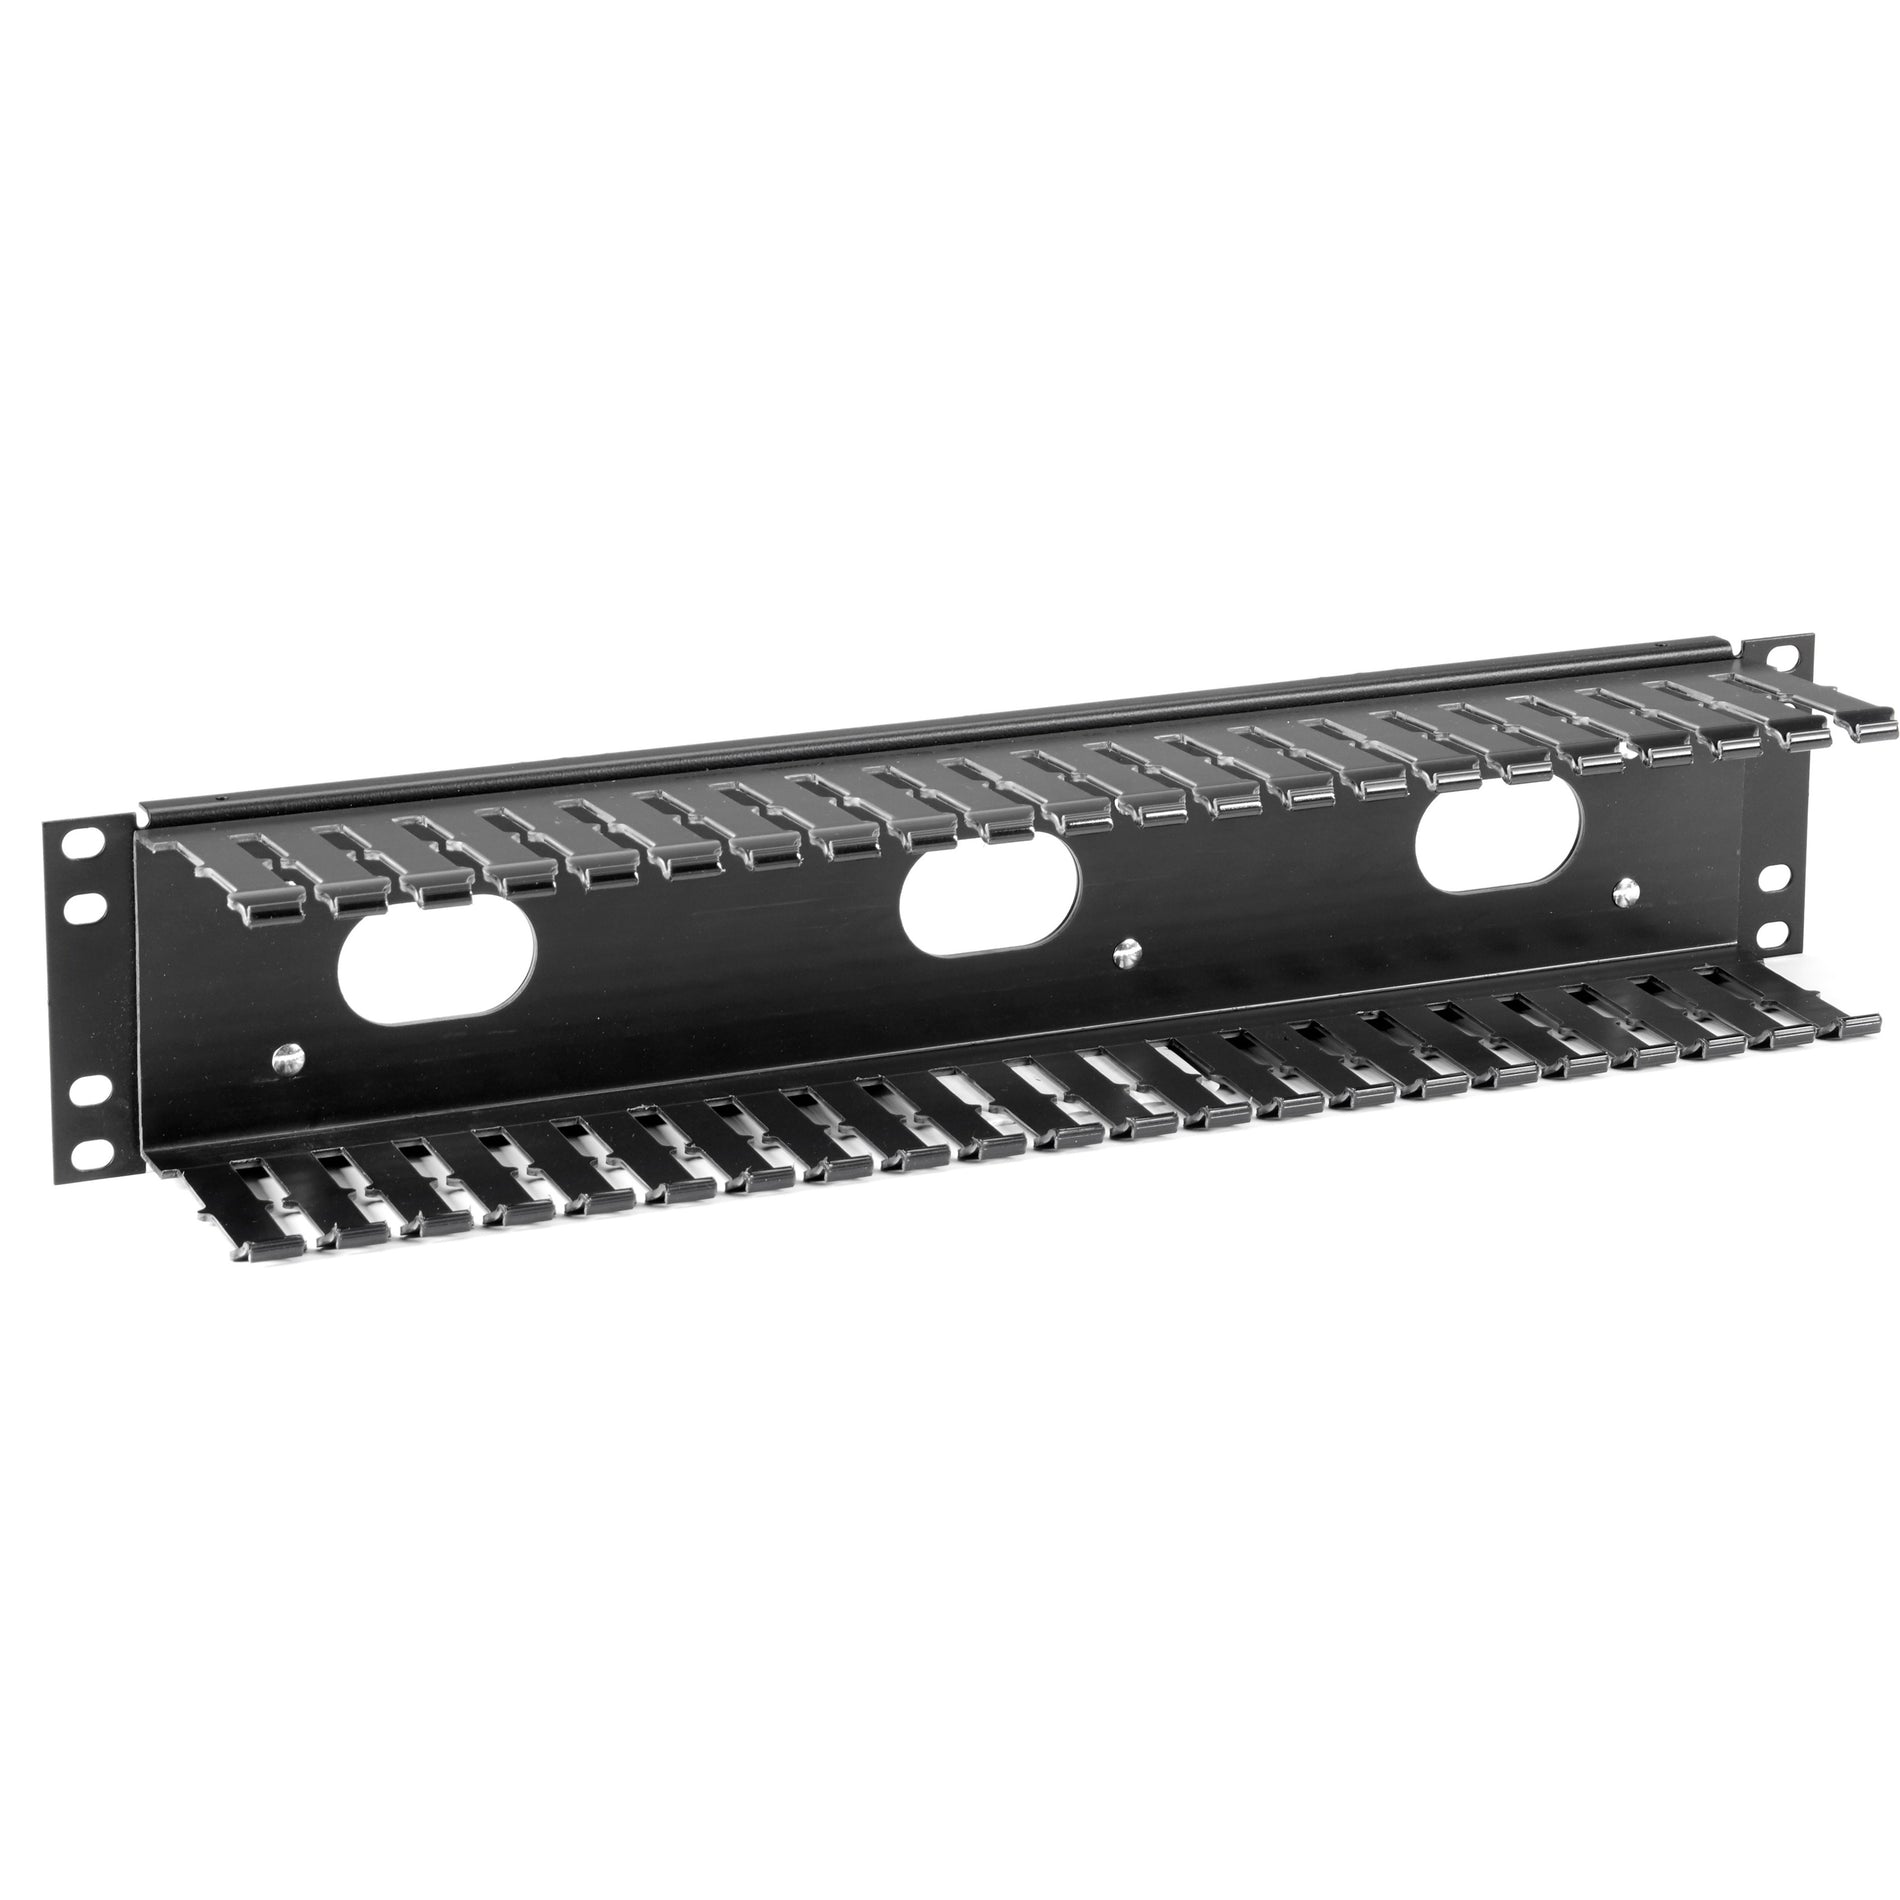 Black Box RMT102A-R4 Horizontal IT Rackmount Cable Manager - 2U, 19", Single-Sided, Black, TAA Compliant